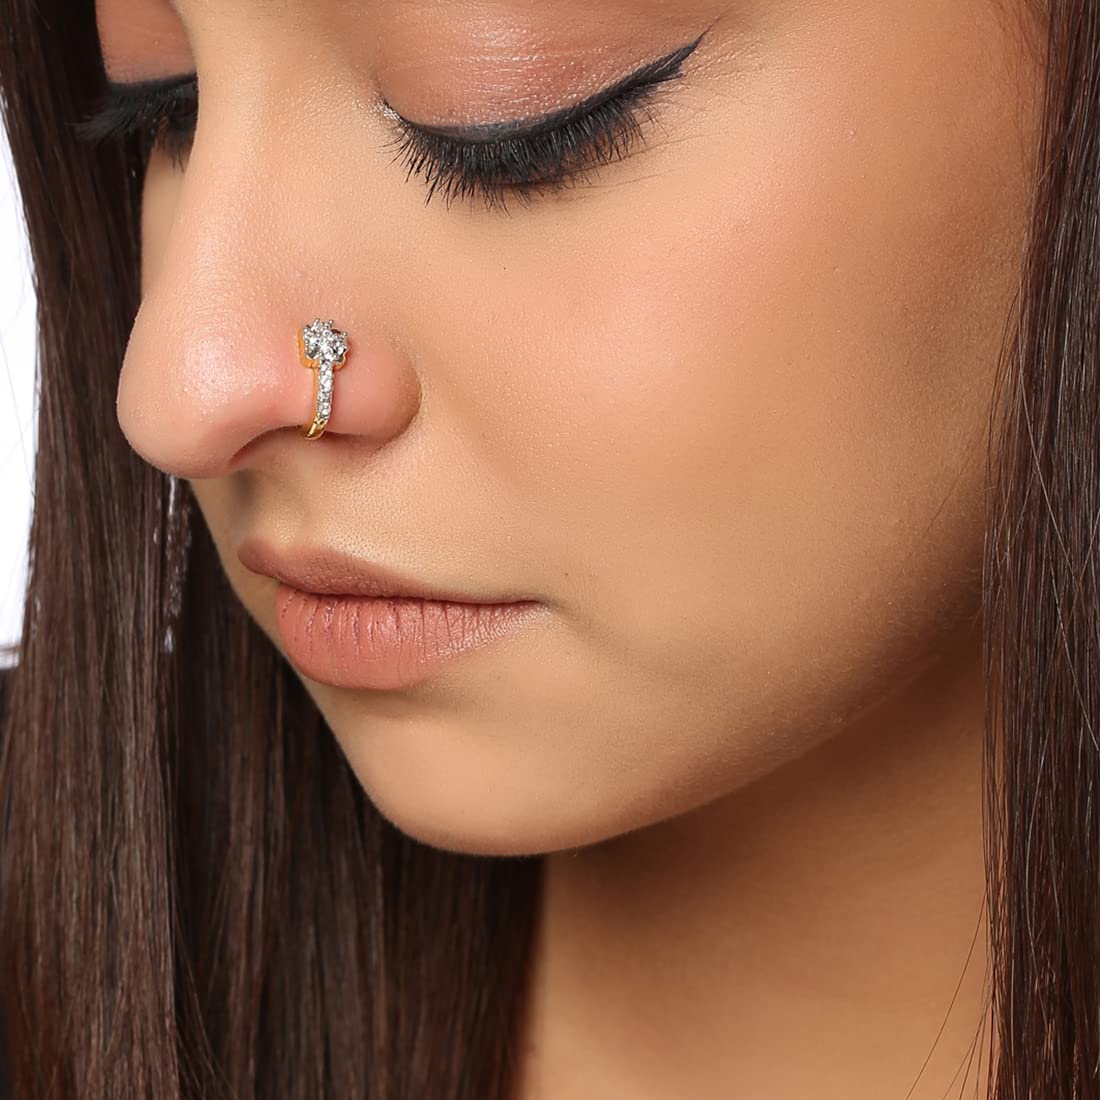 Latest Fashionable And Trending Nose Rings Of 2021 - Fashion and Beauty  Tips for Men's or women's